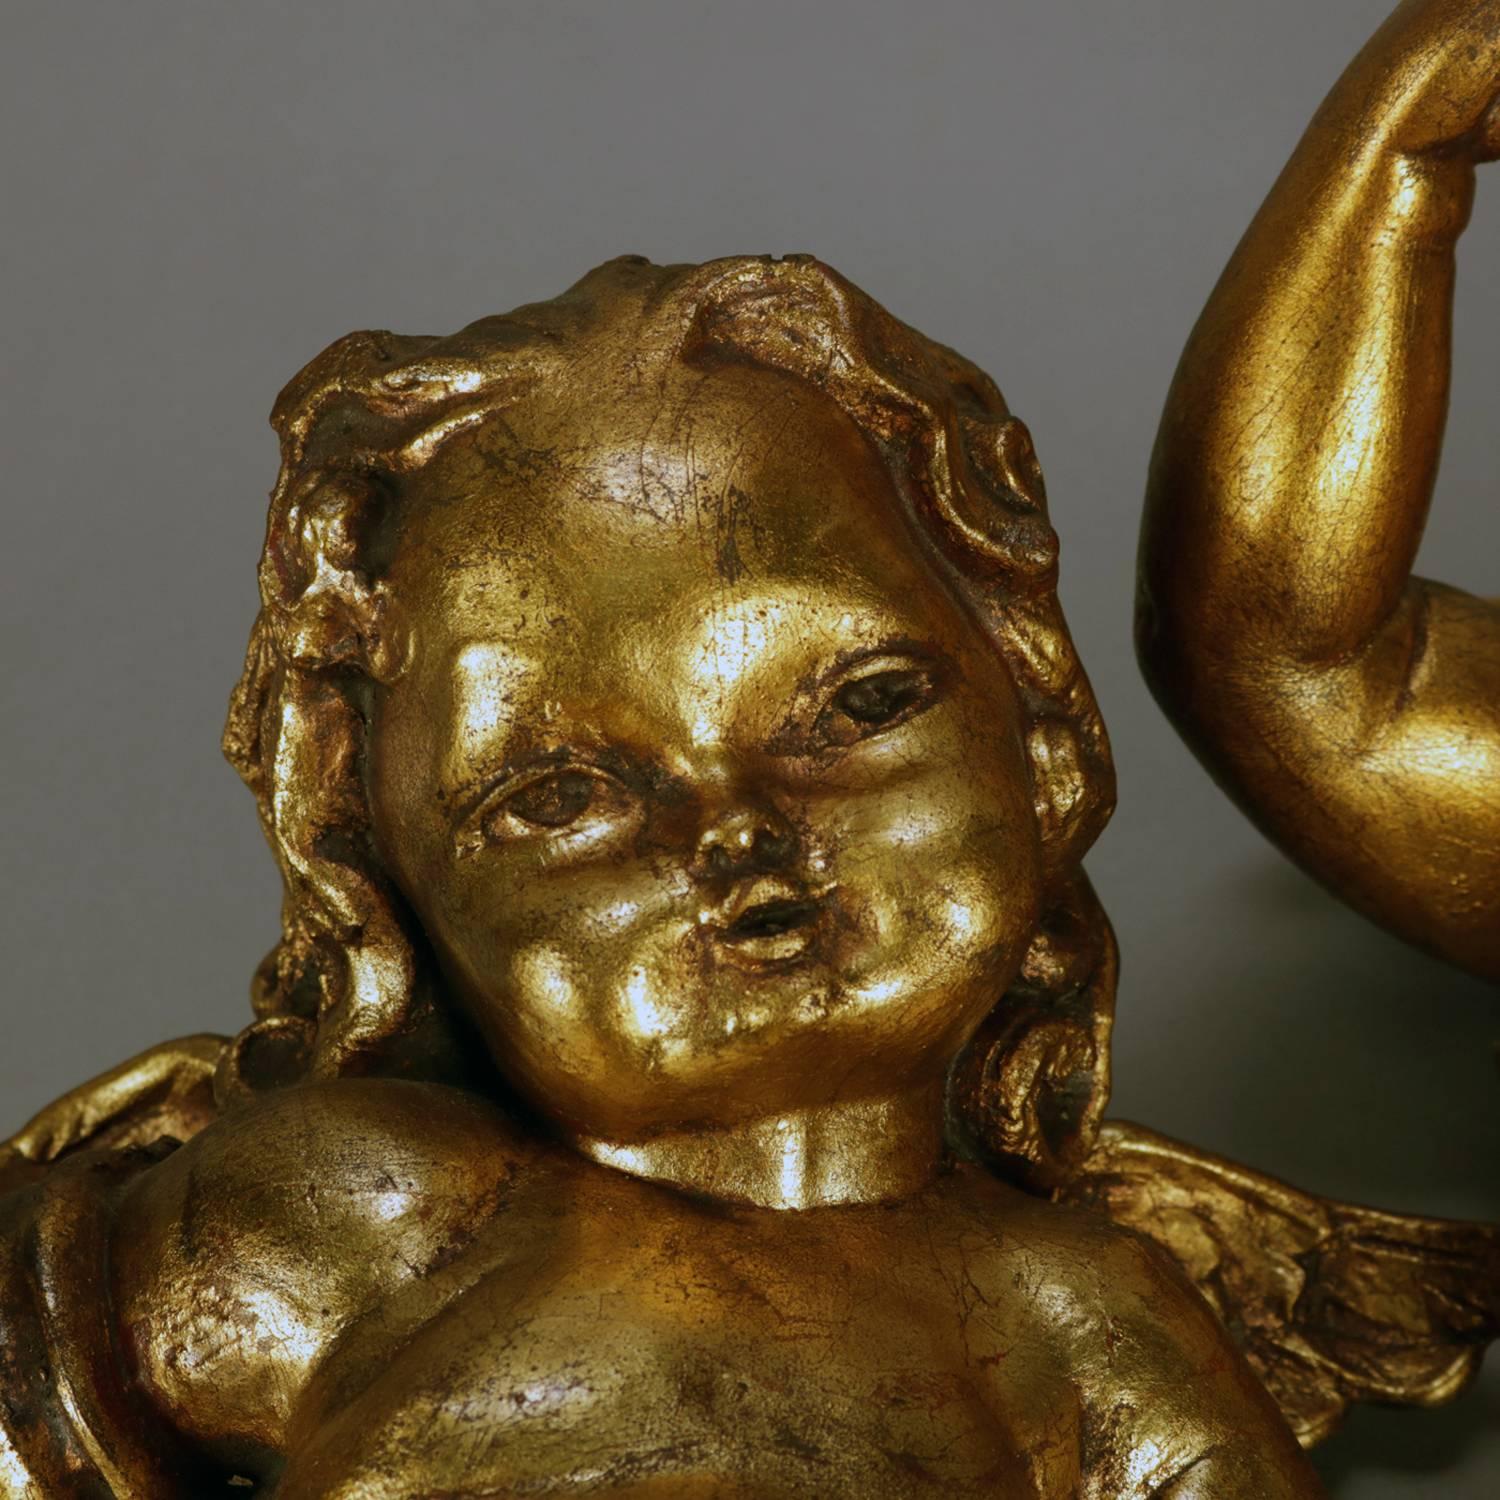 Vintage Italian Classical gilt plaster figural wall mounted sculptures depict musician cherubs, one with cymbals and the other with harp, 20th century

Measures: 18